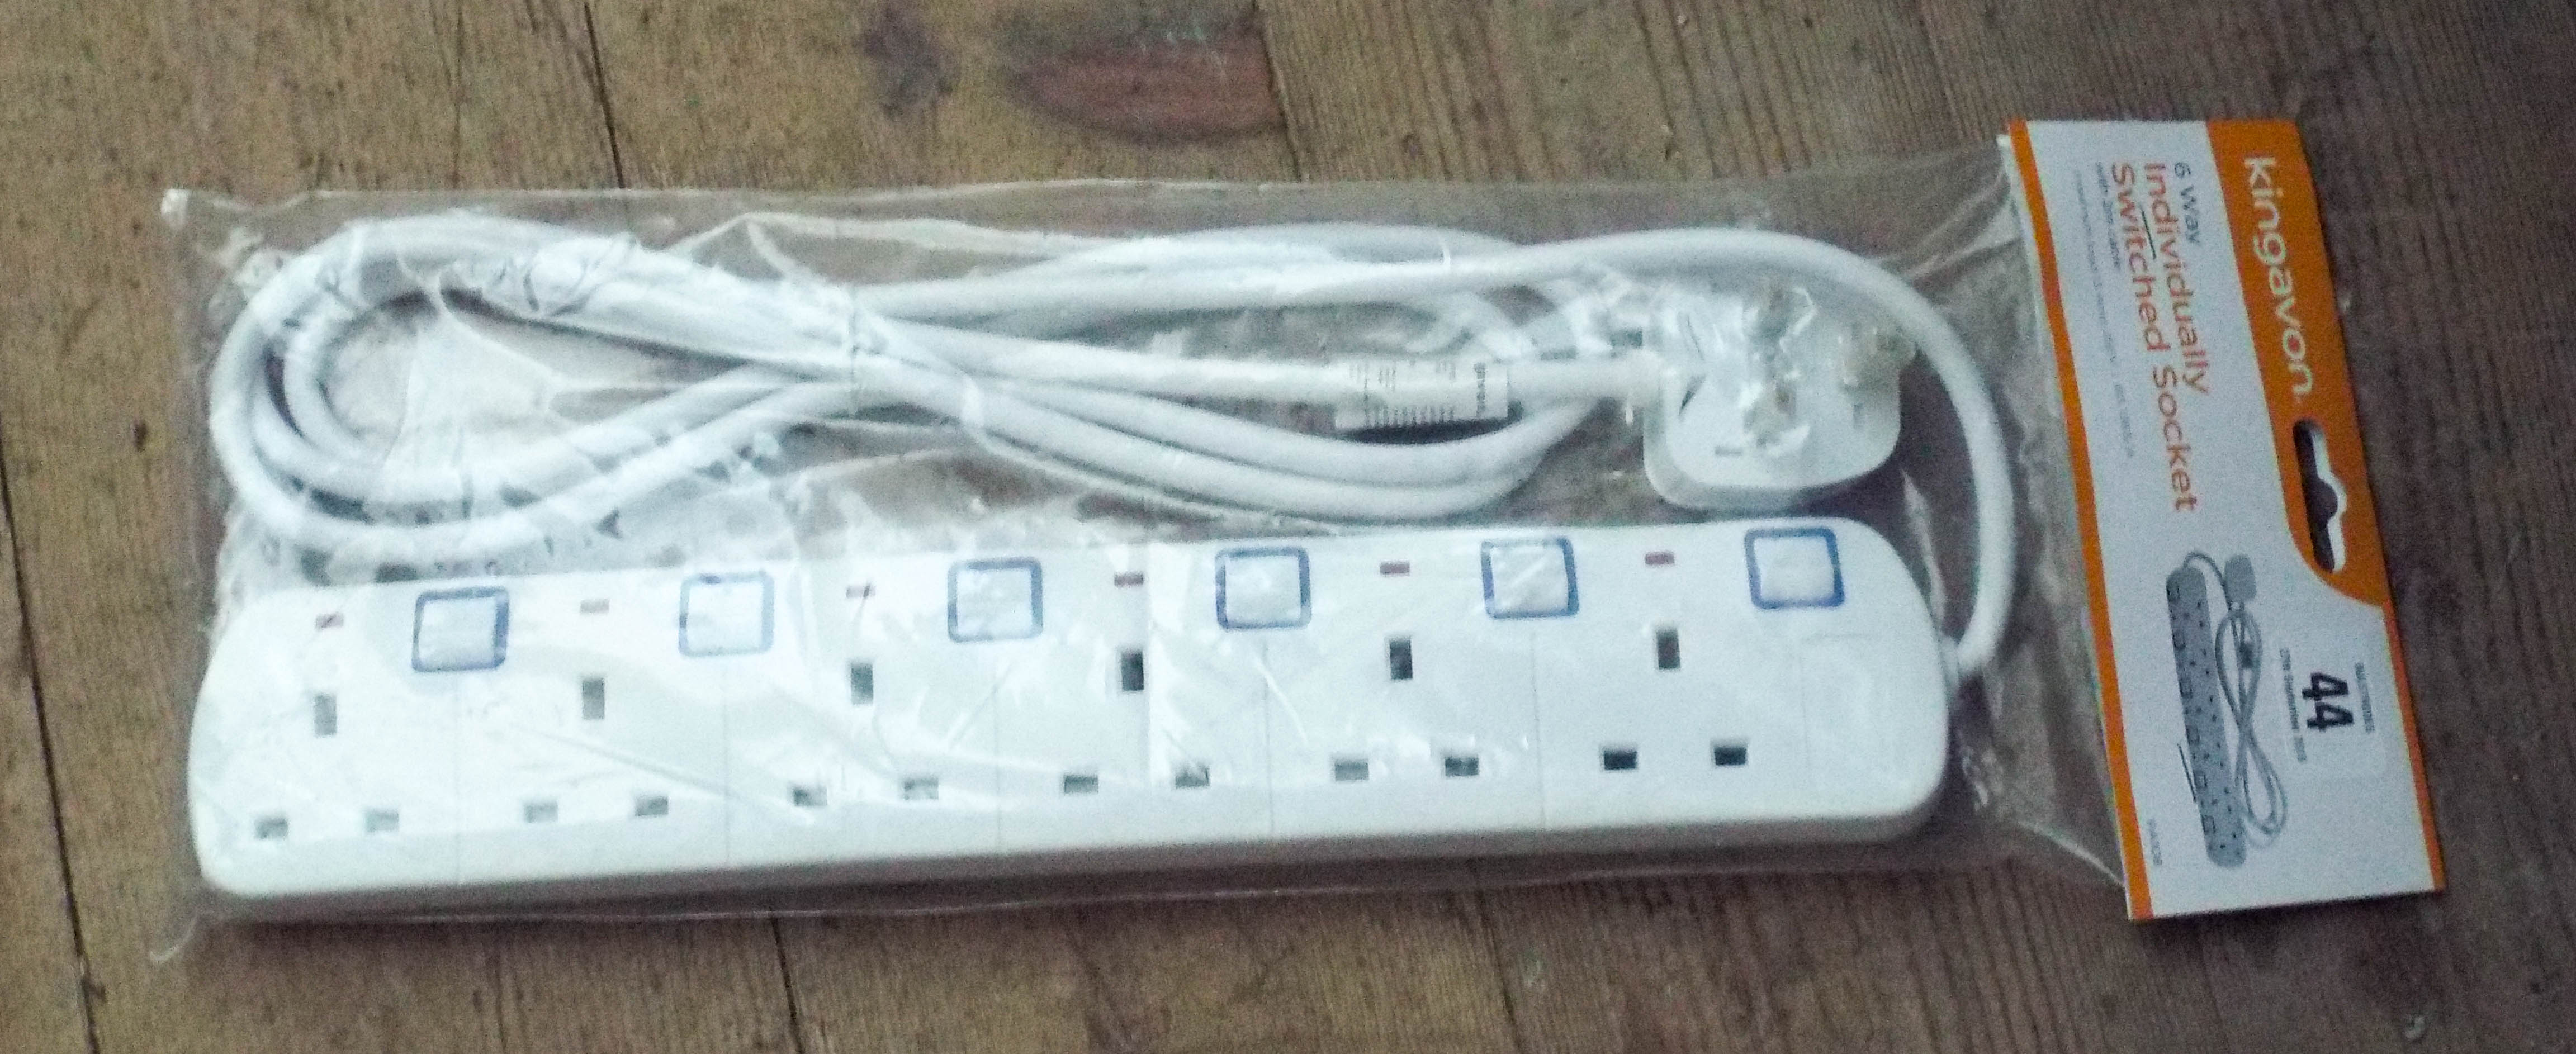 A new six way individually switched socket